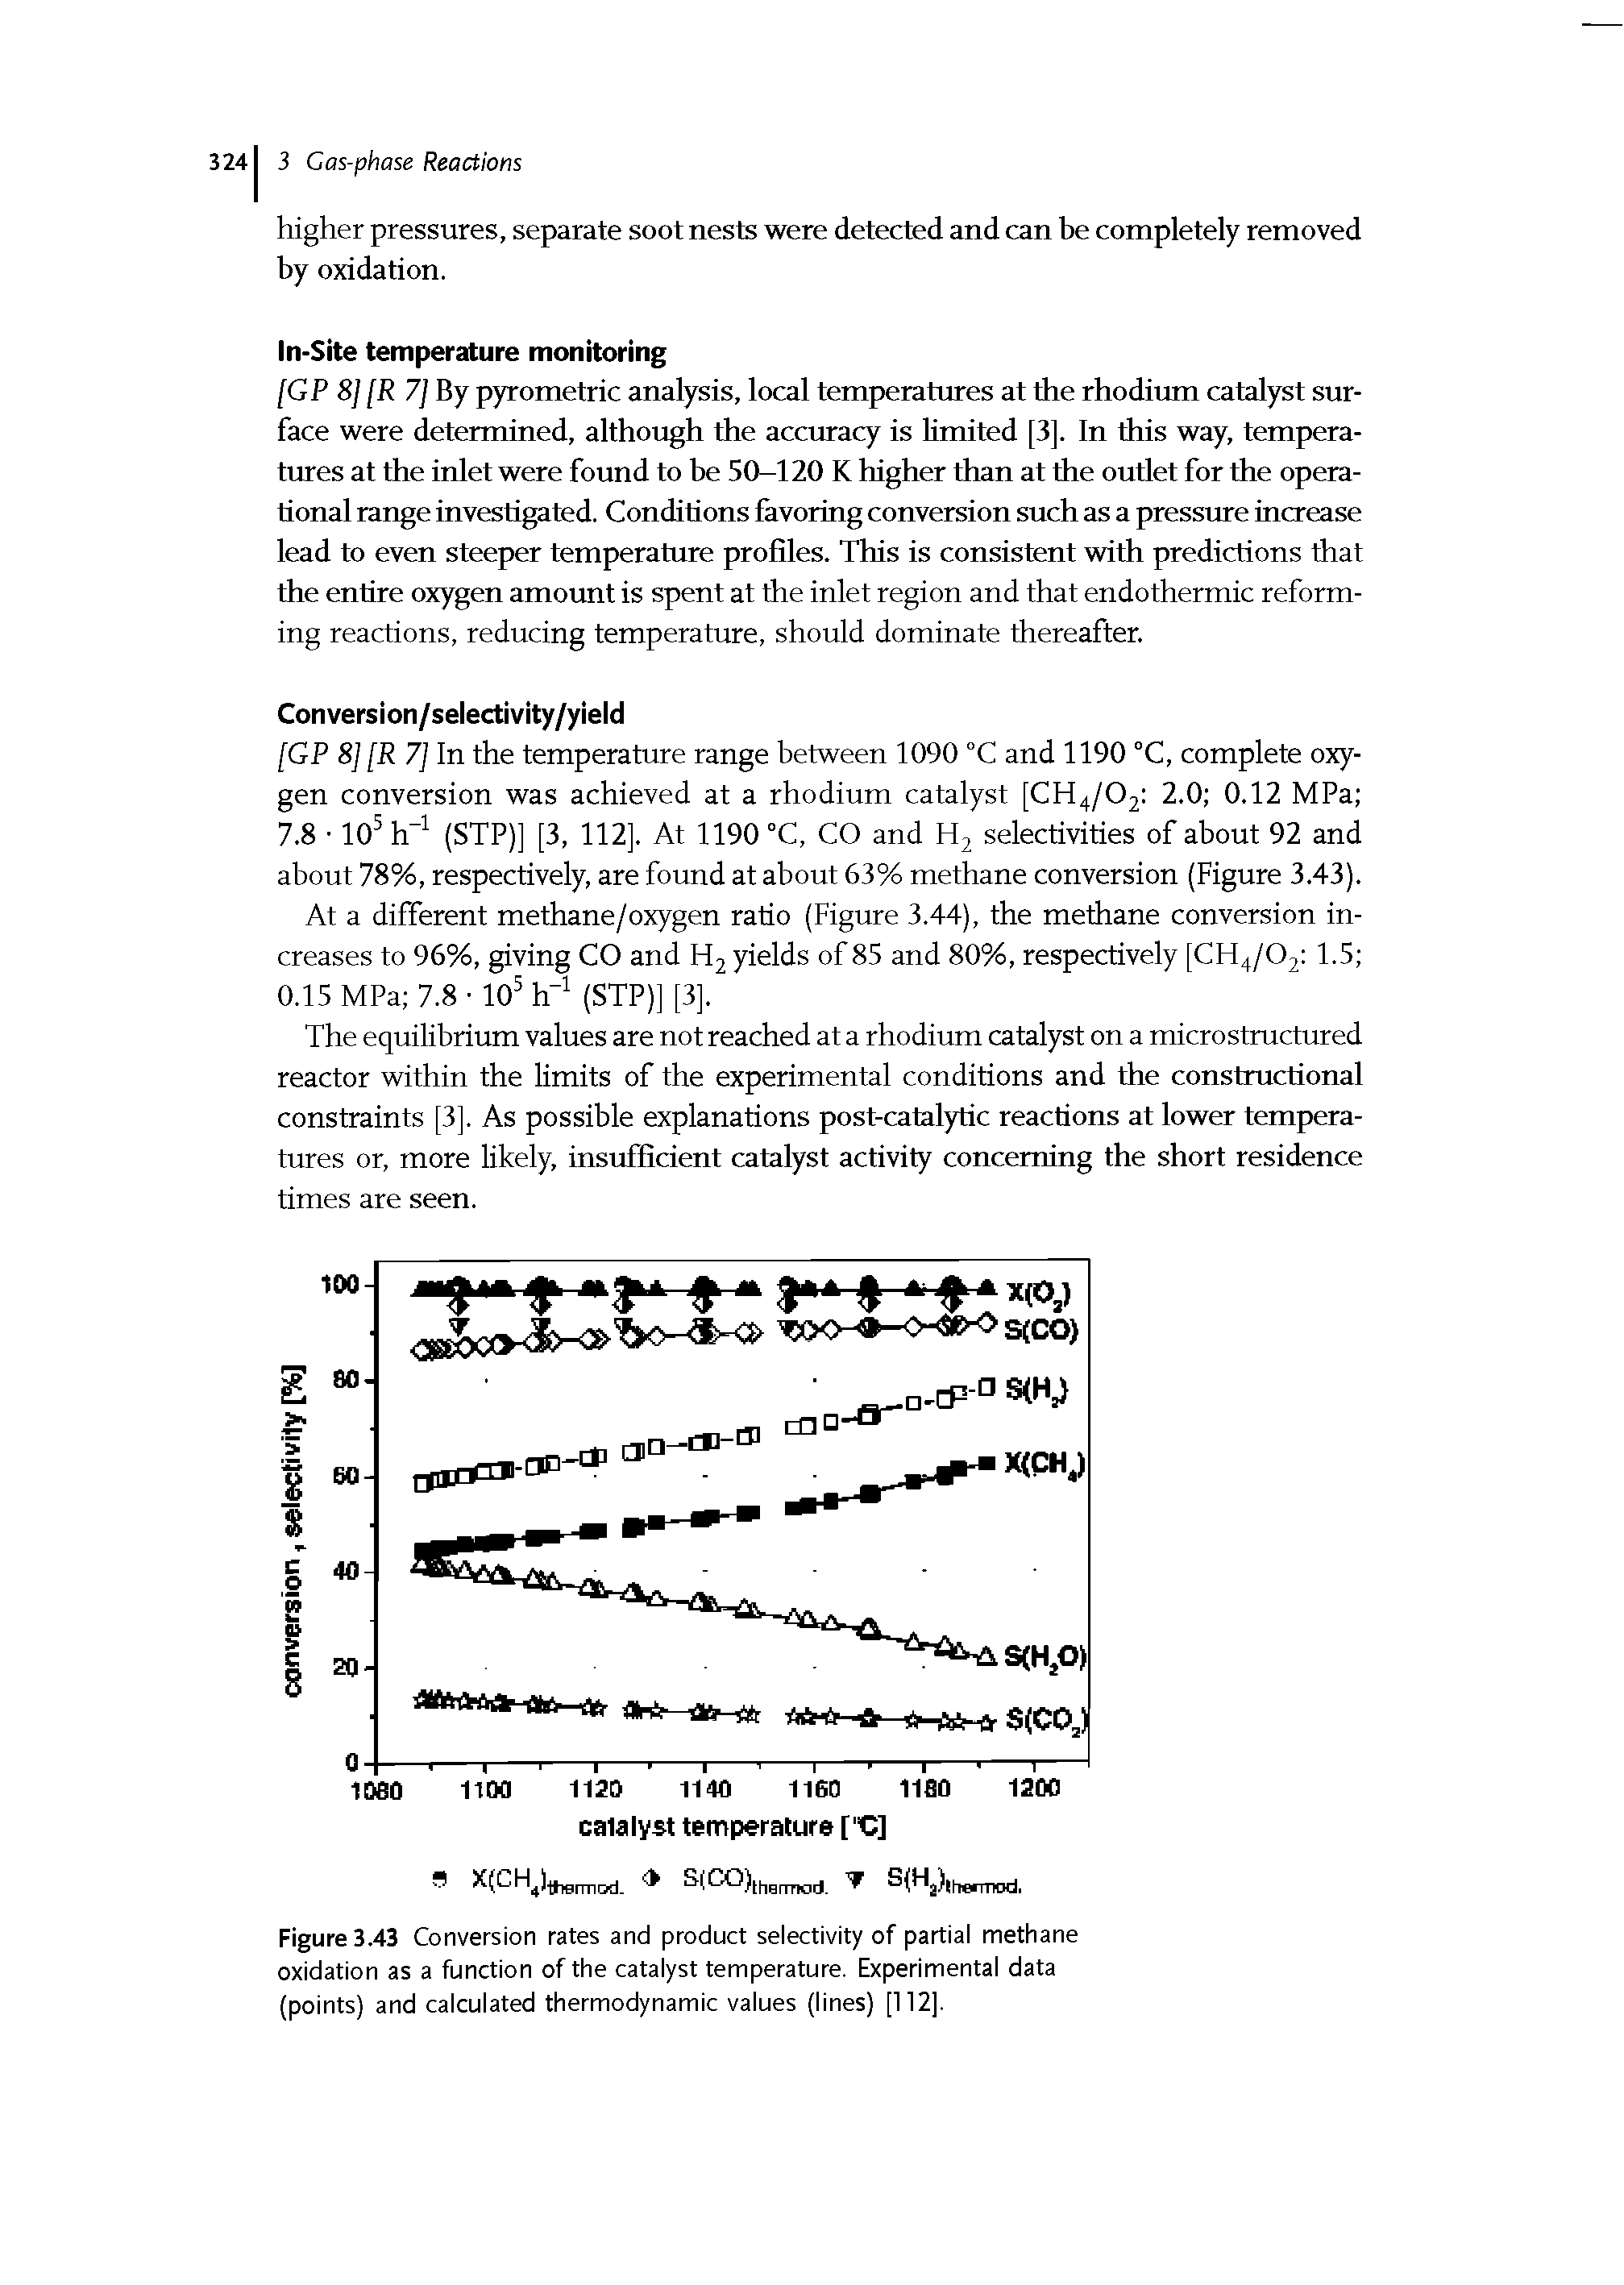 Figure 3.43 Conversion rates and product selectivity of partial methane oxidation as a function of the catalyst temperature. Experimental data (points) and calculated thermodynamic values (lines) [112].